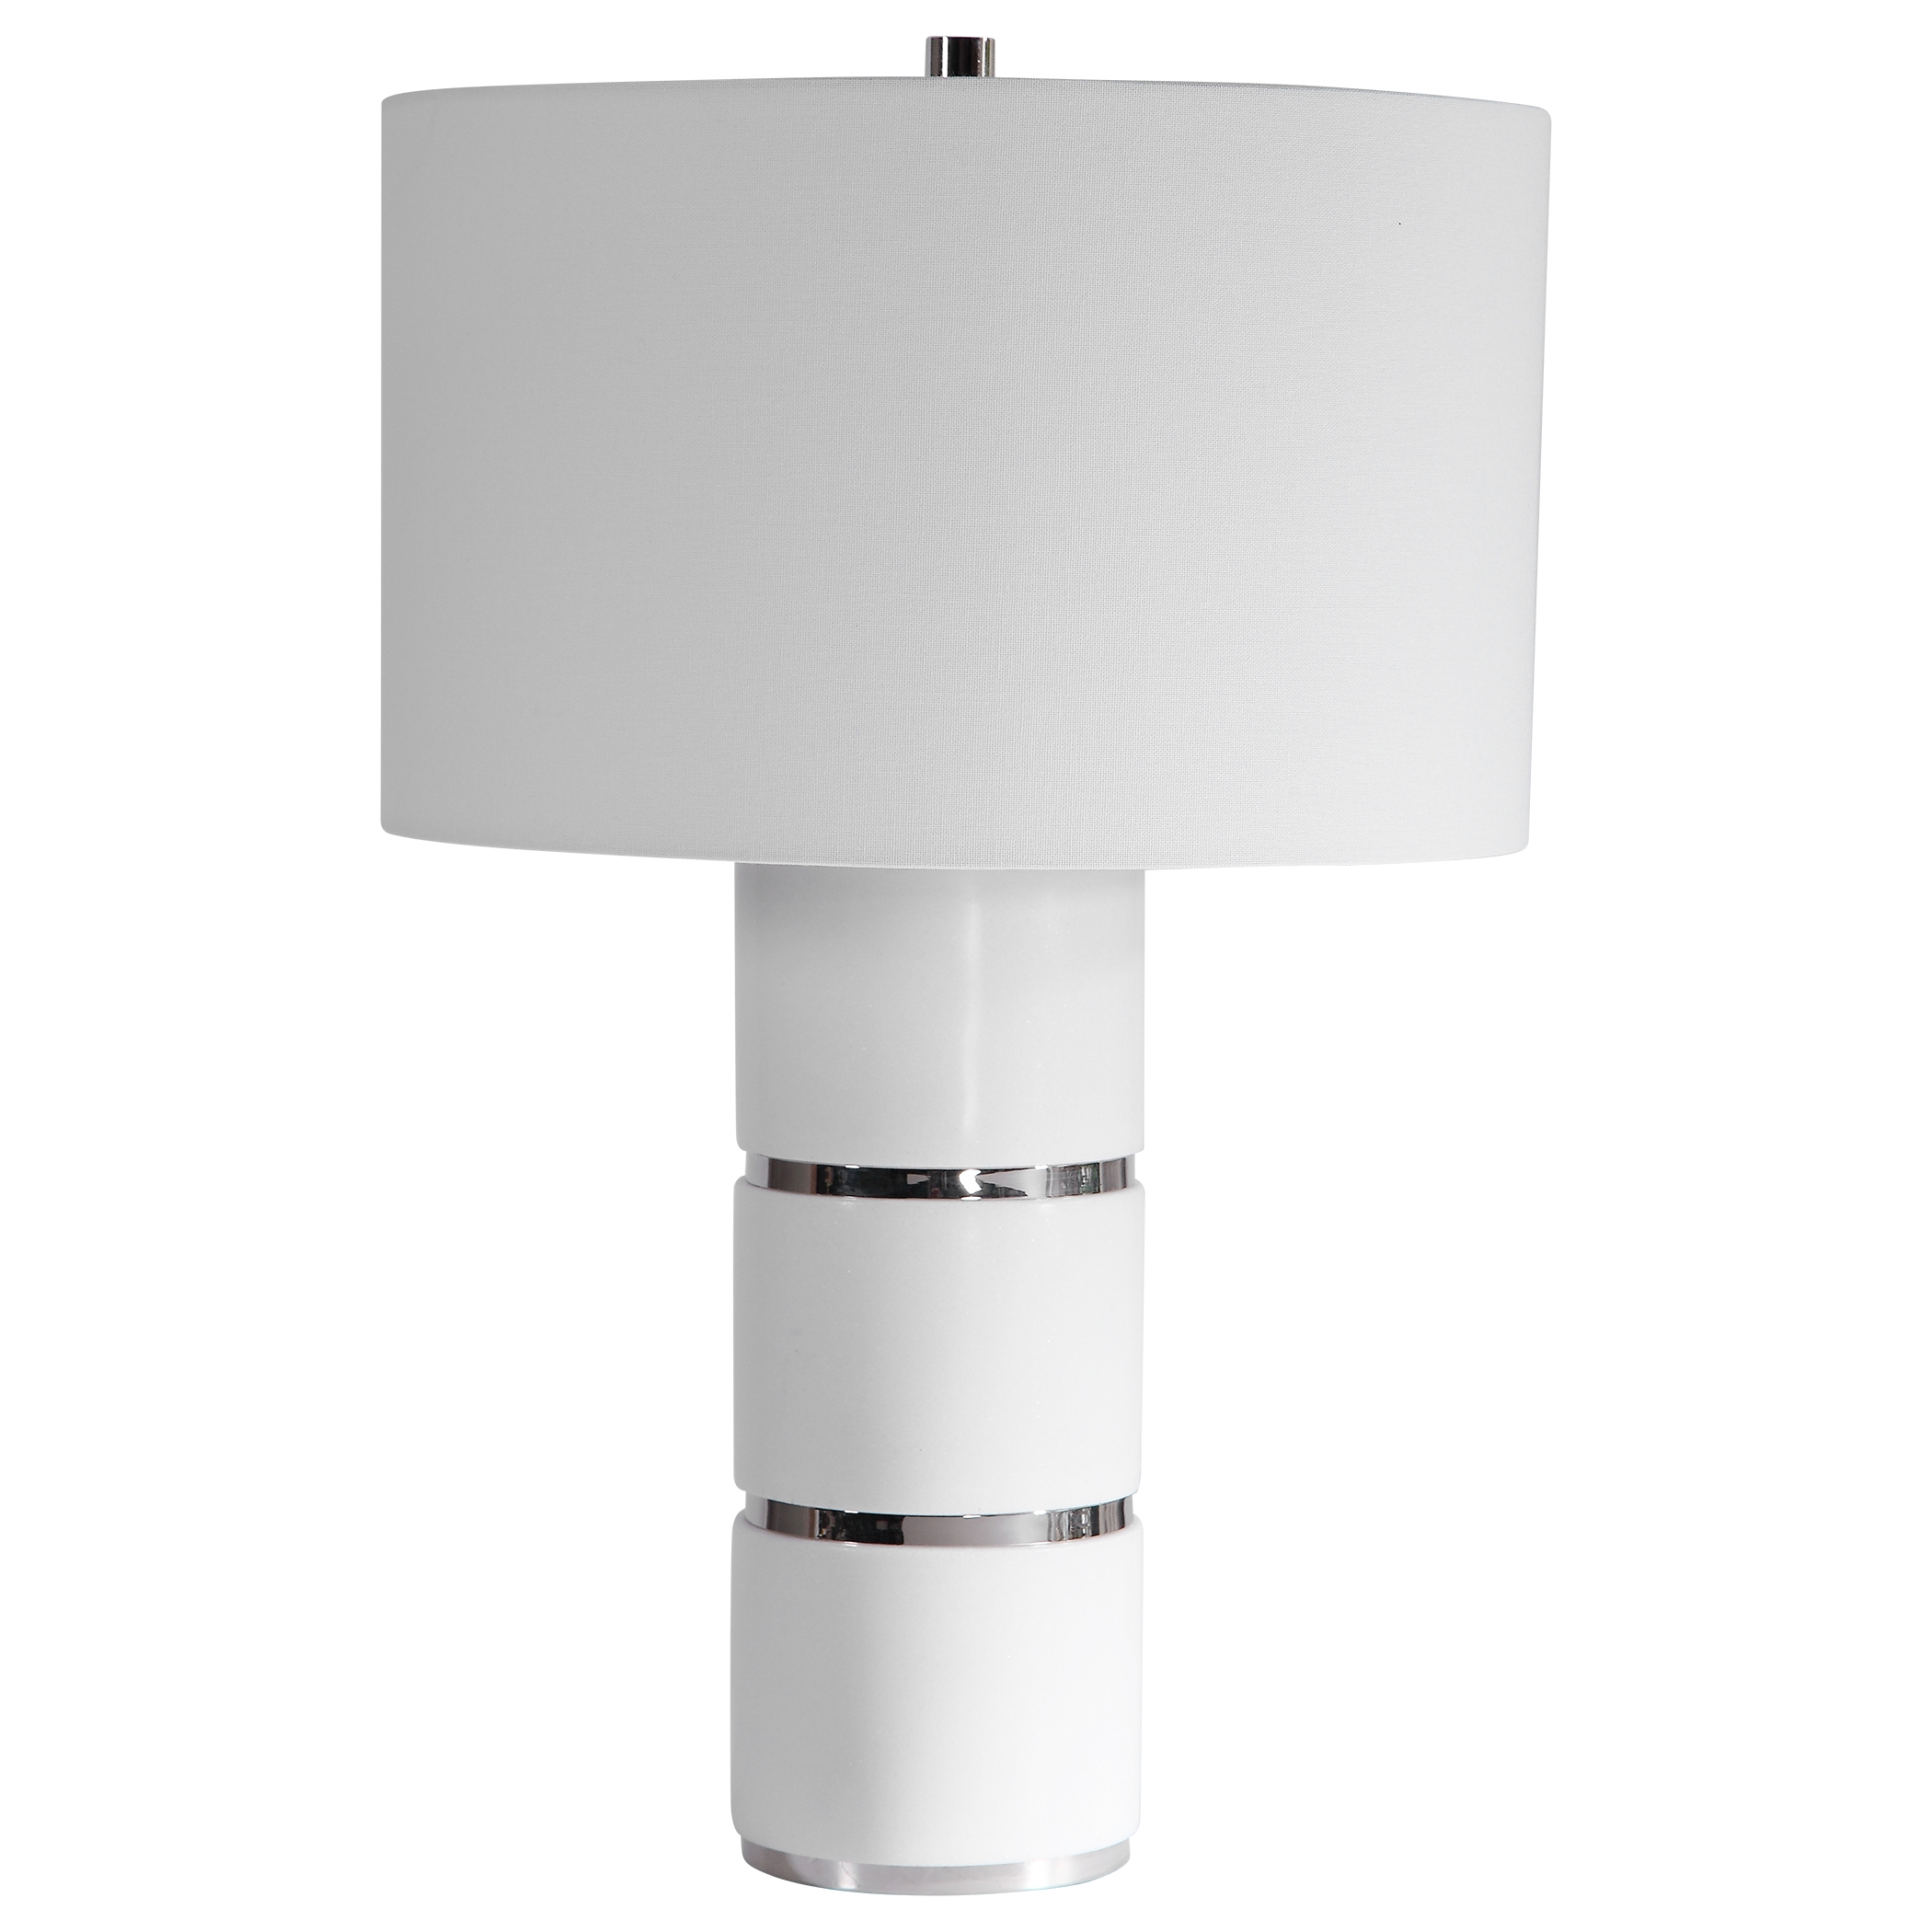 Grania White Marble Table Lamp - Image 6